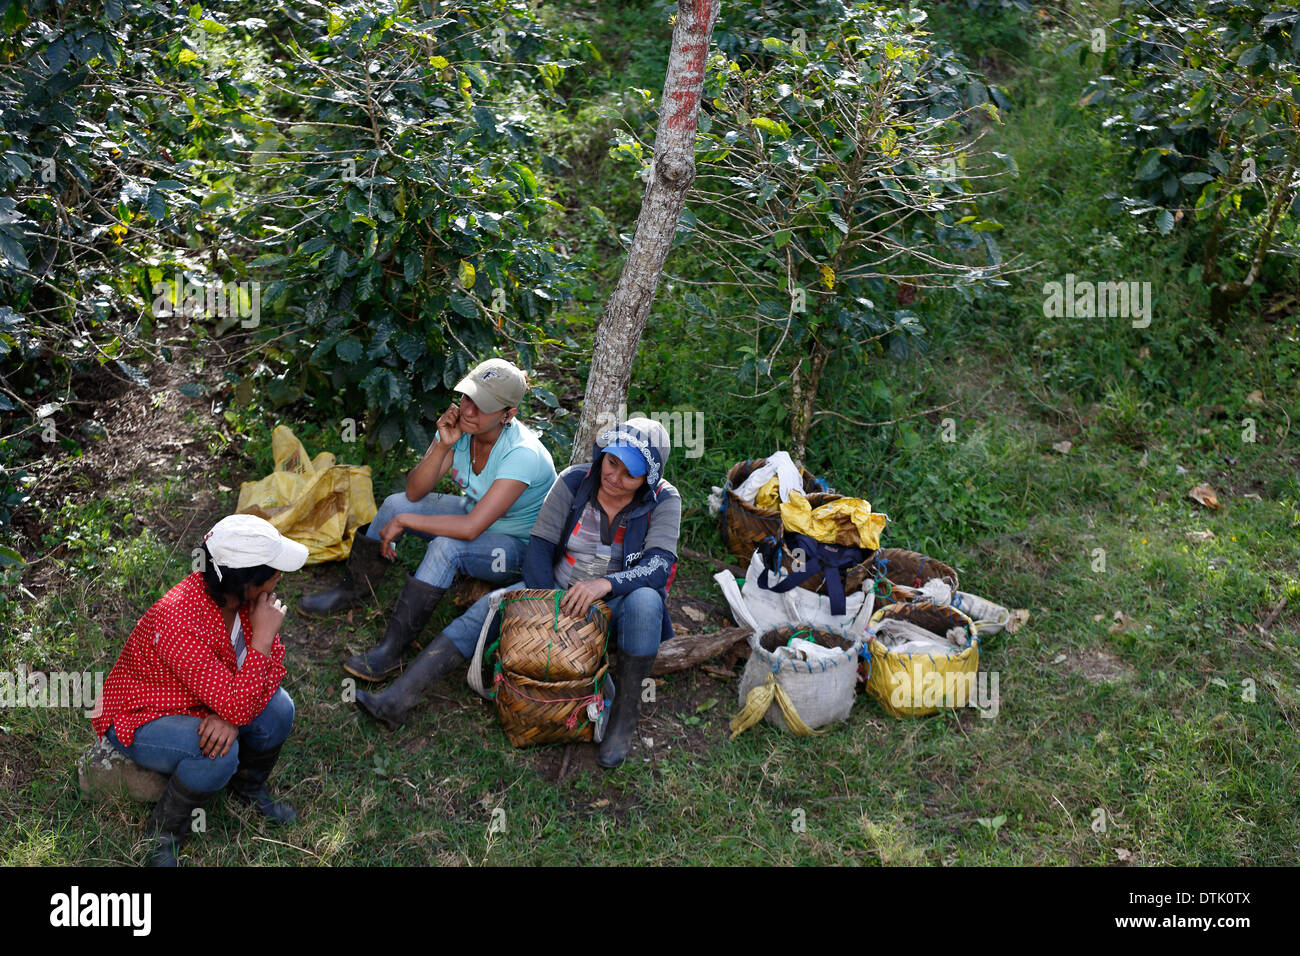 Workers take a break as they wait to have their day's coffee harvest tallied, northwest Nicaragua Stock Photo